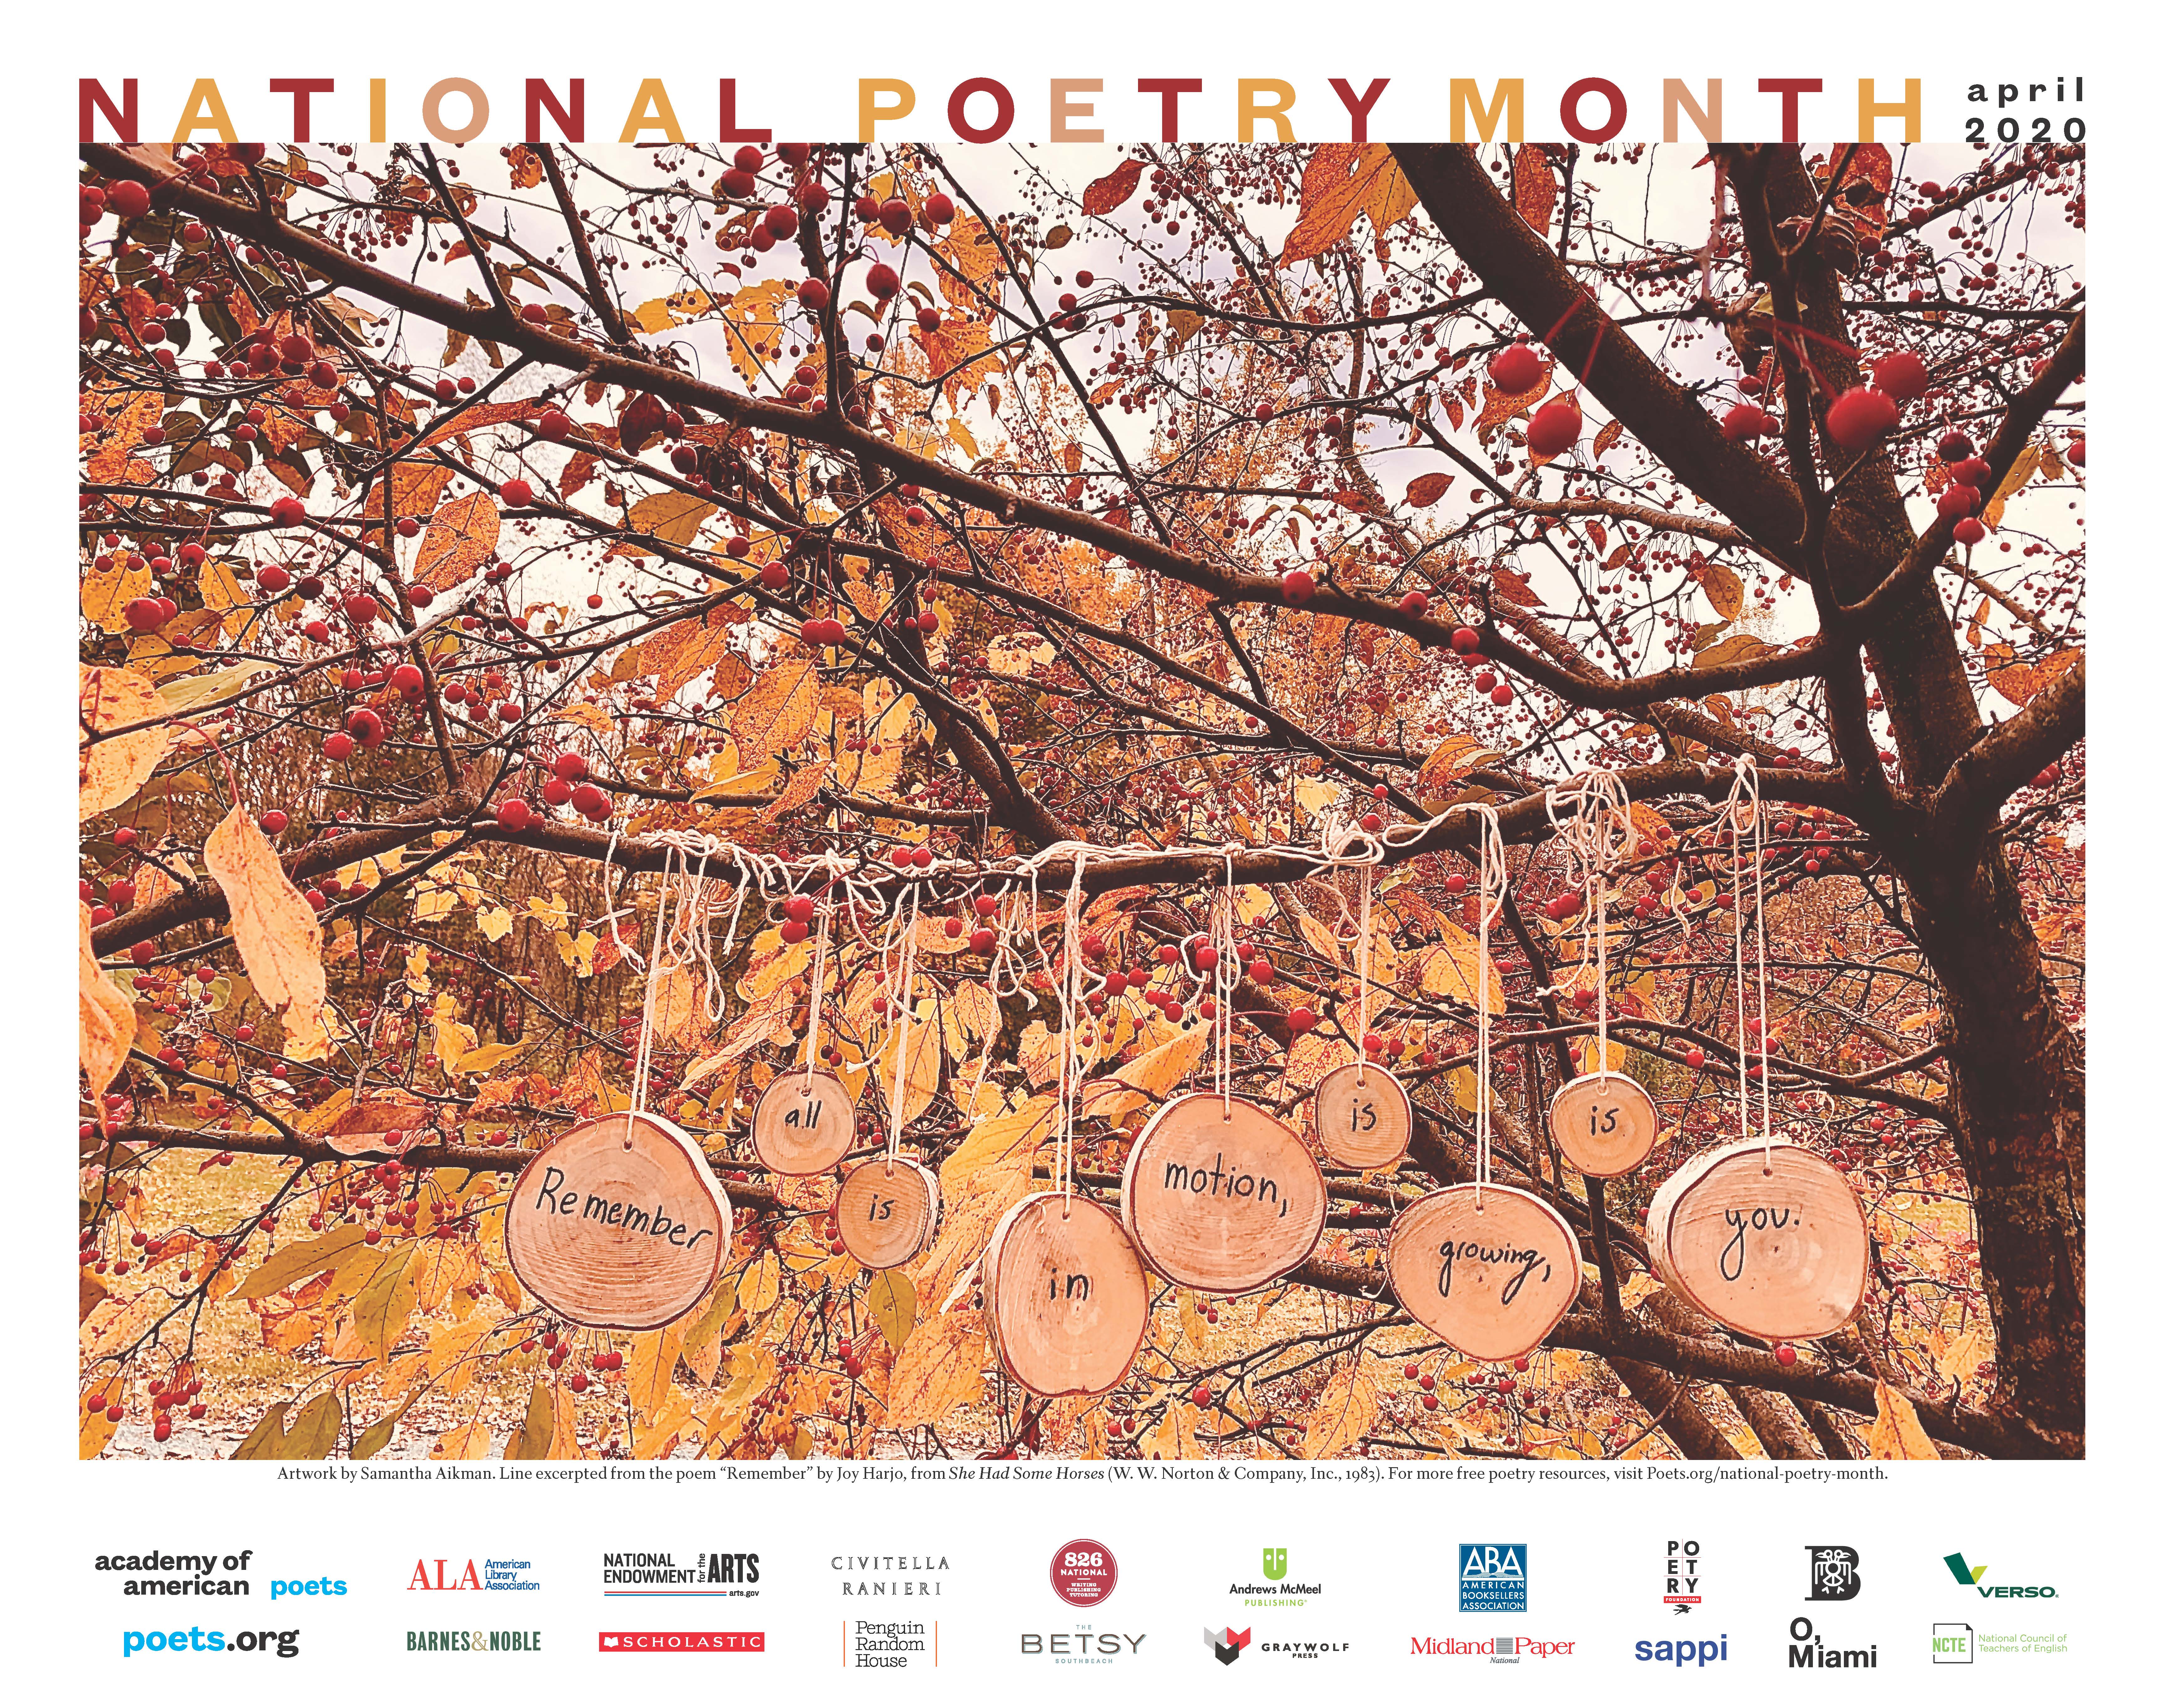 Poster advertising National Poetry Month, April 2020. There is an image of slices of wood marked with Joy Harjo poem hanging from tree. Sponsors of the event are included below the image.